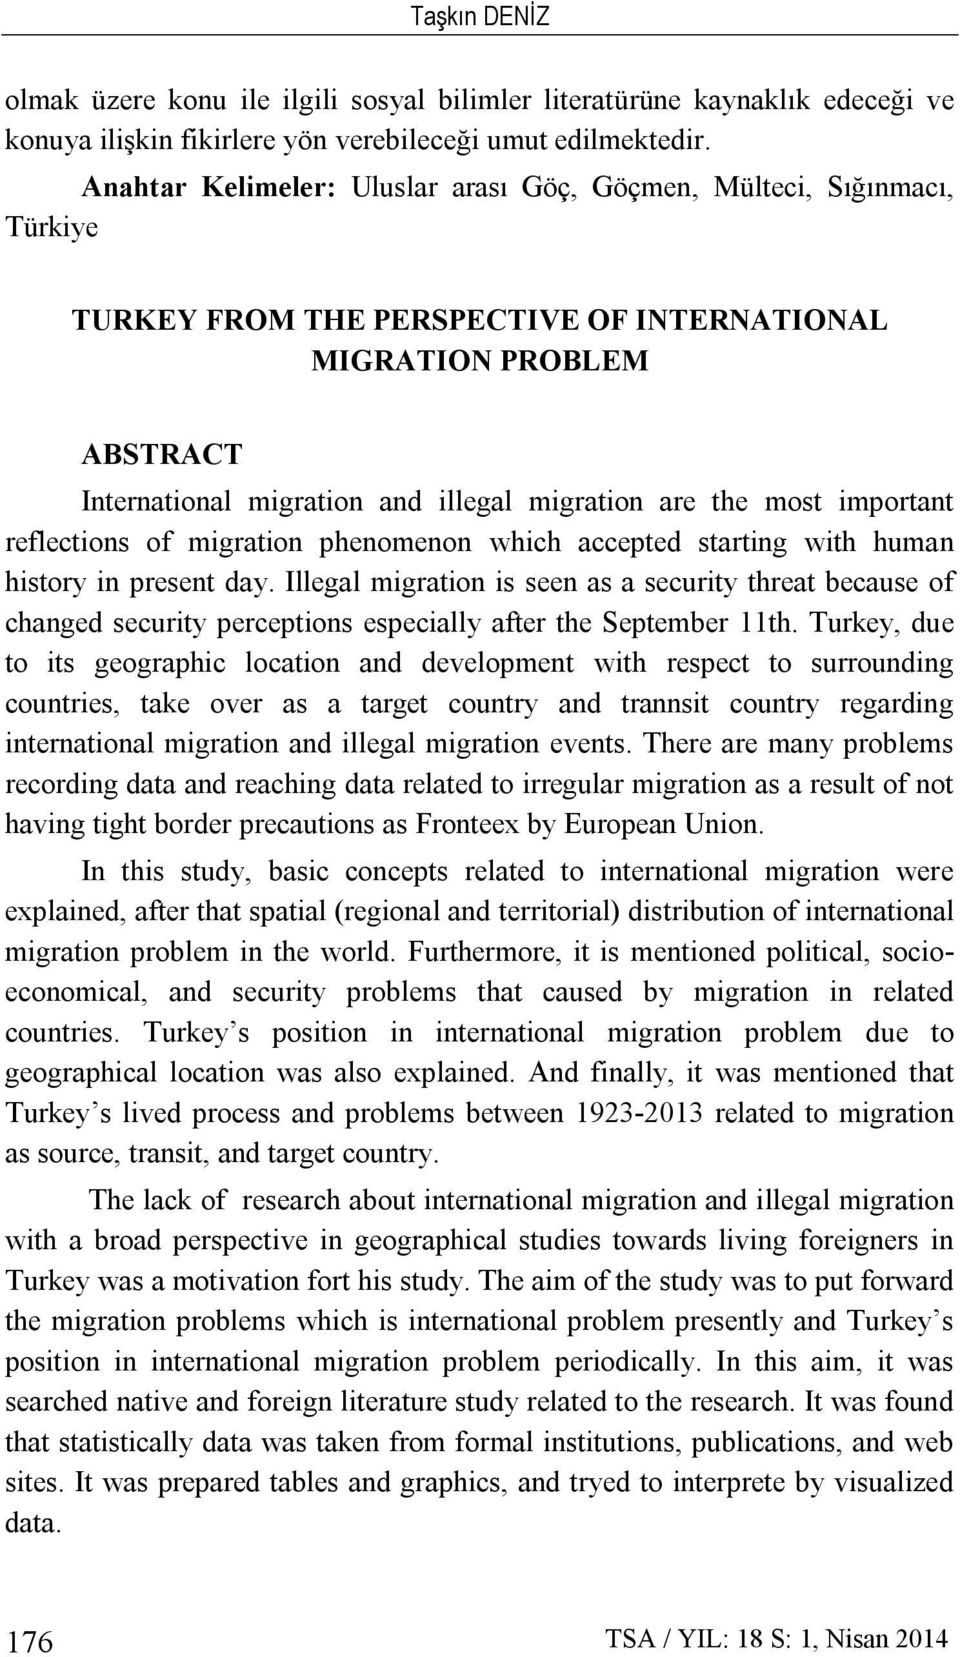 most important reflections of migration phenomenon which accepted starting with human history in present day.